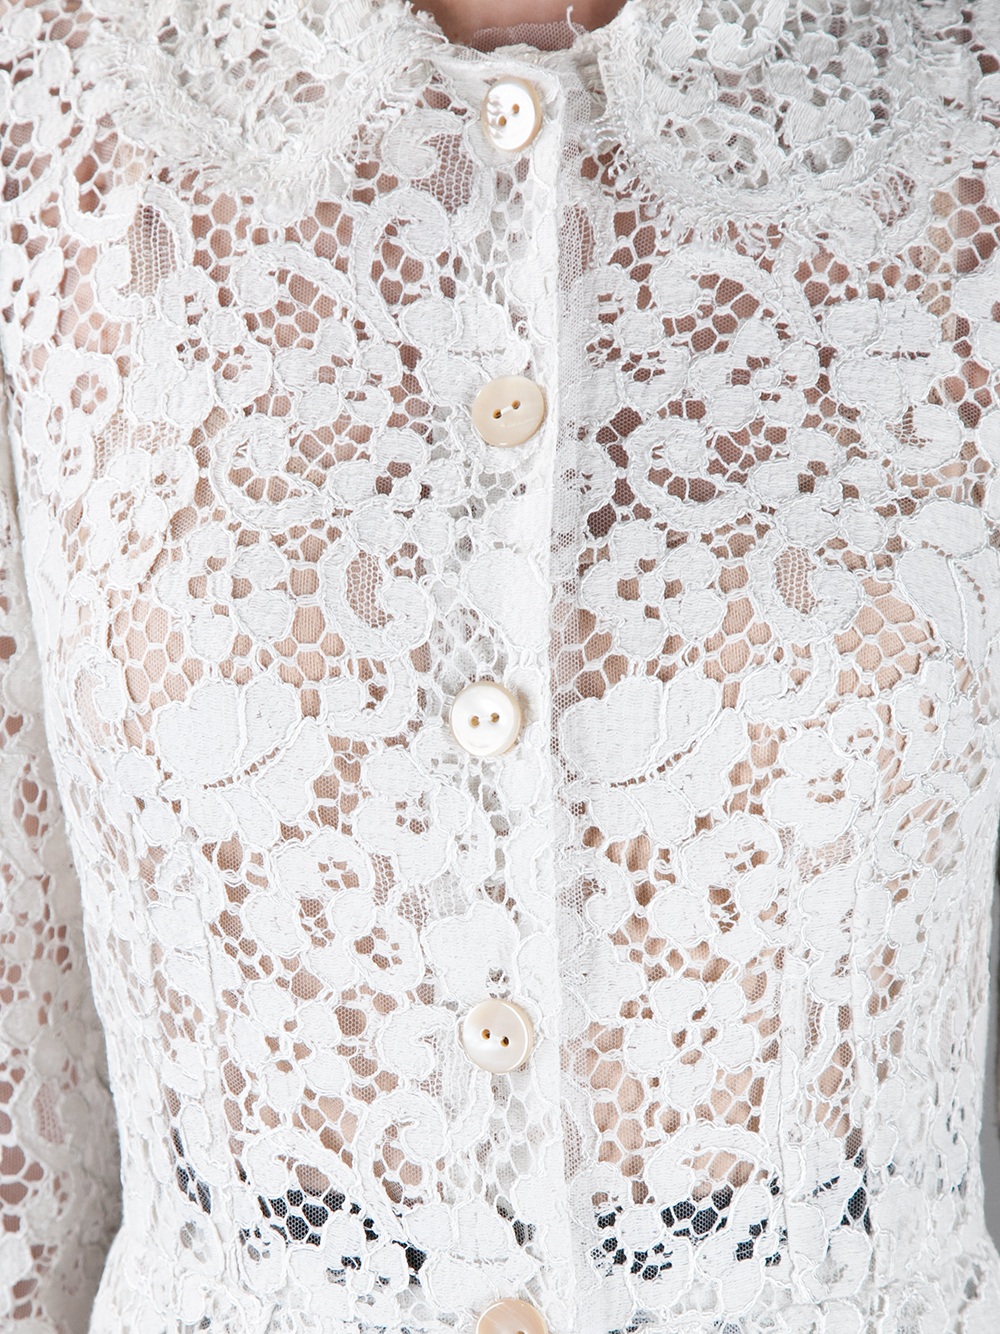 Lyst - Dolce & Gabbana Sheer Lace Jacket in White